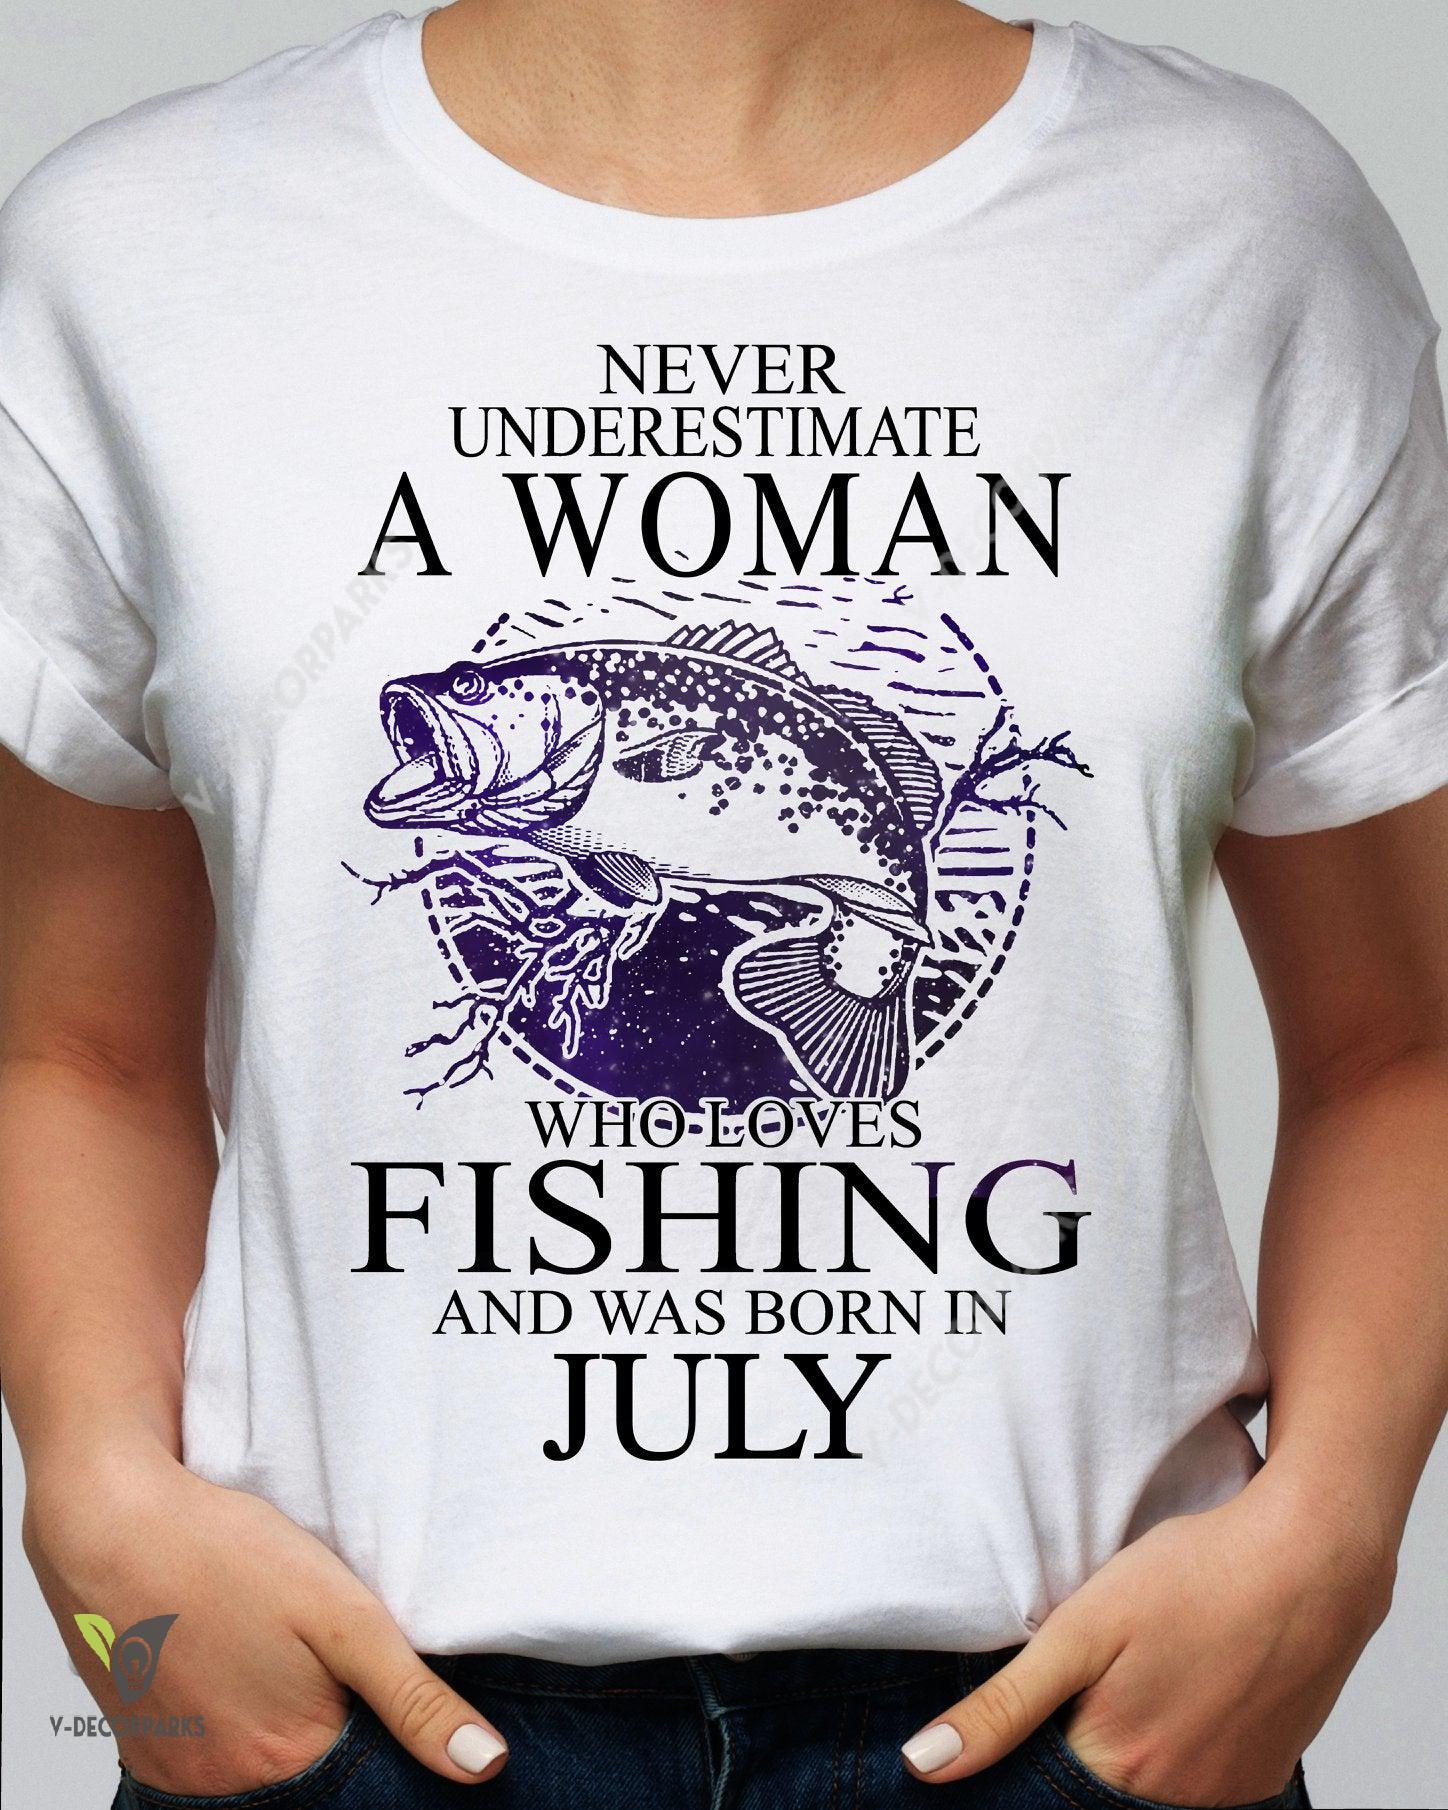 Never Underestimate A Woman Who Loves Fishing And Was Born In July Birthday Gift Women’s T-shirt Hoodie Sweatshirt Plus Size S-5xl